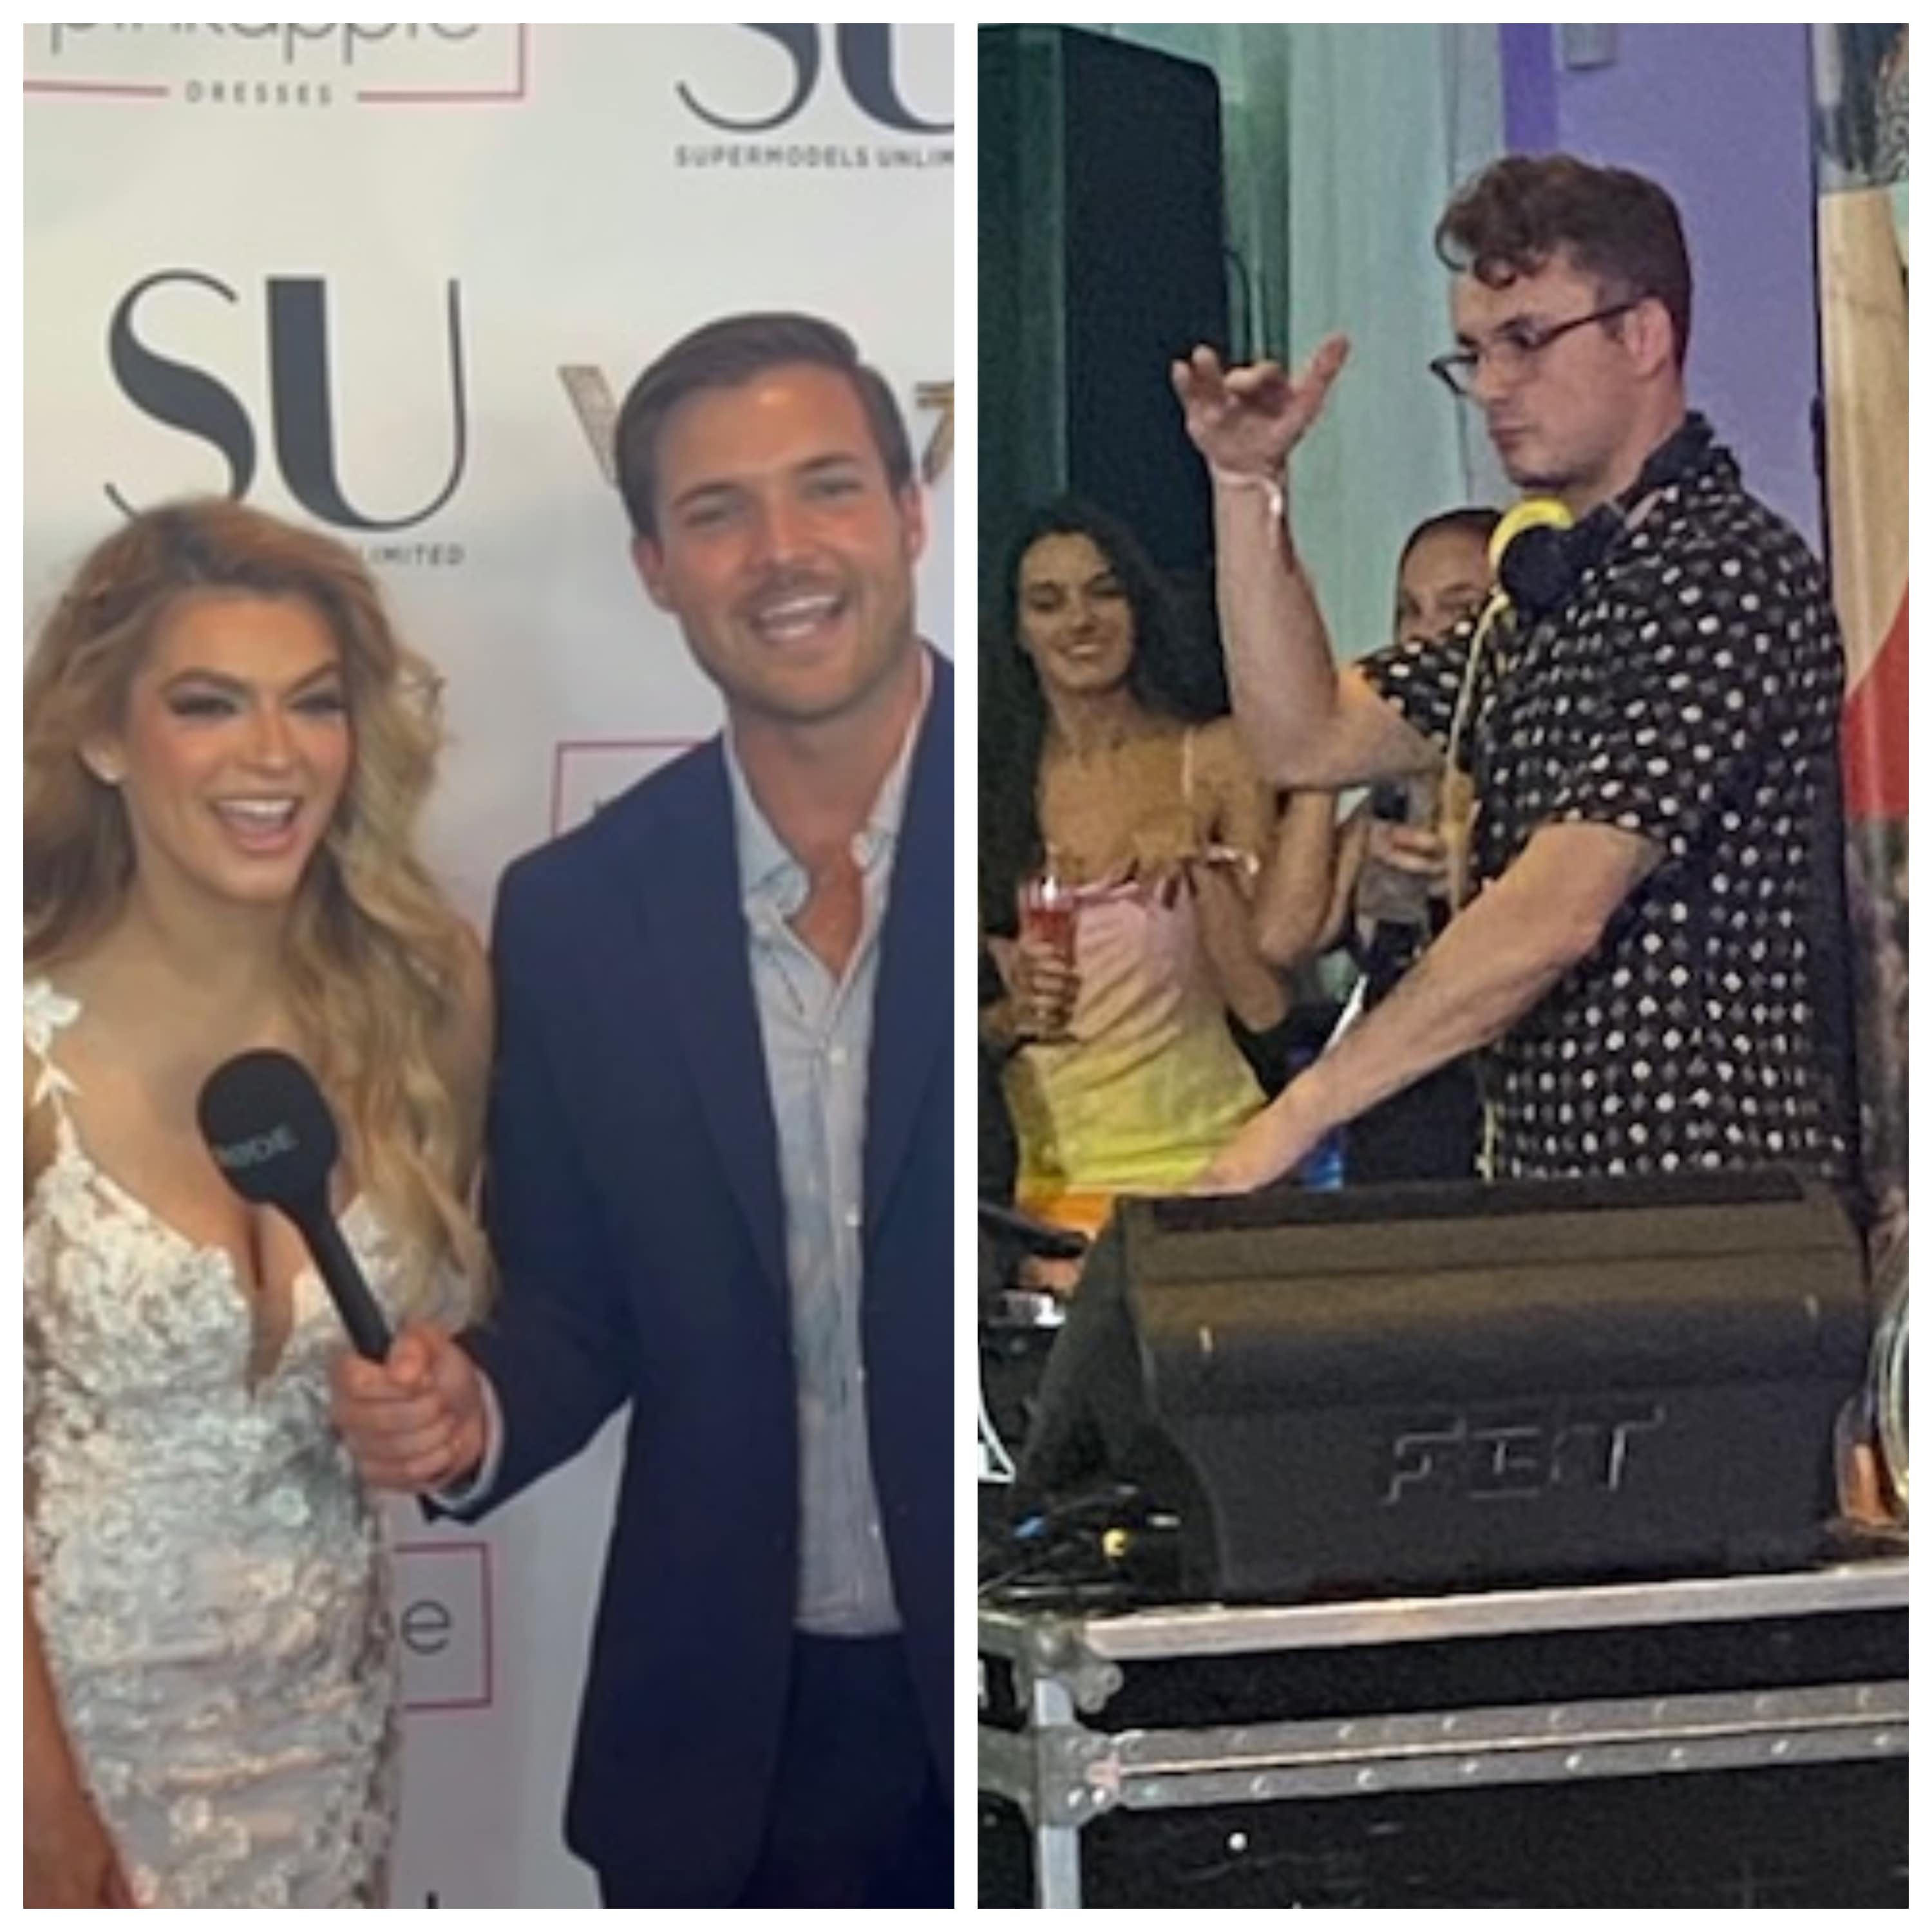 Jordan Kimball from 'The Bachelorette interviews. Kasey Cohen from 'Below Deck Med.' James Kennedy from 'Vanderpump Rules' DJs at the Supermodels Unlimited event. 